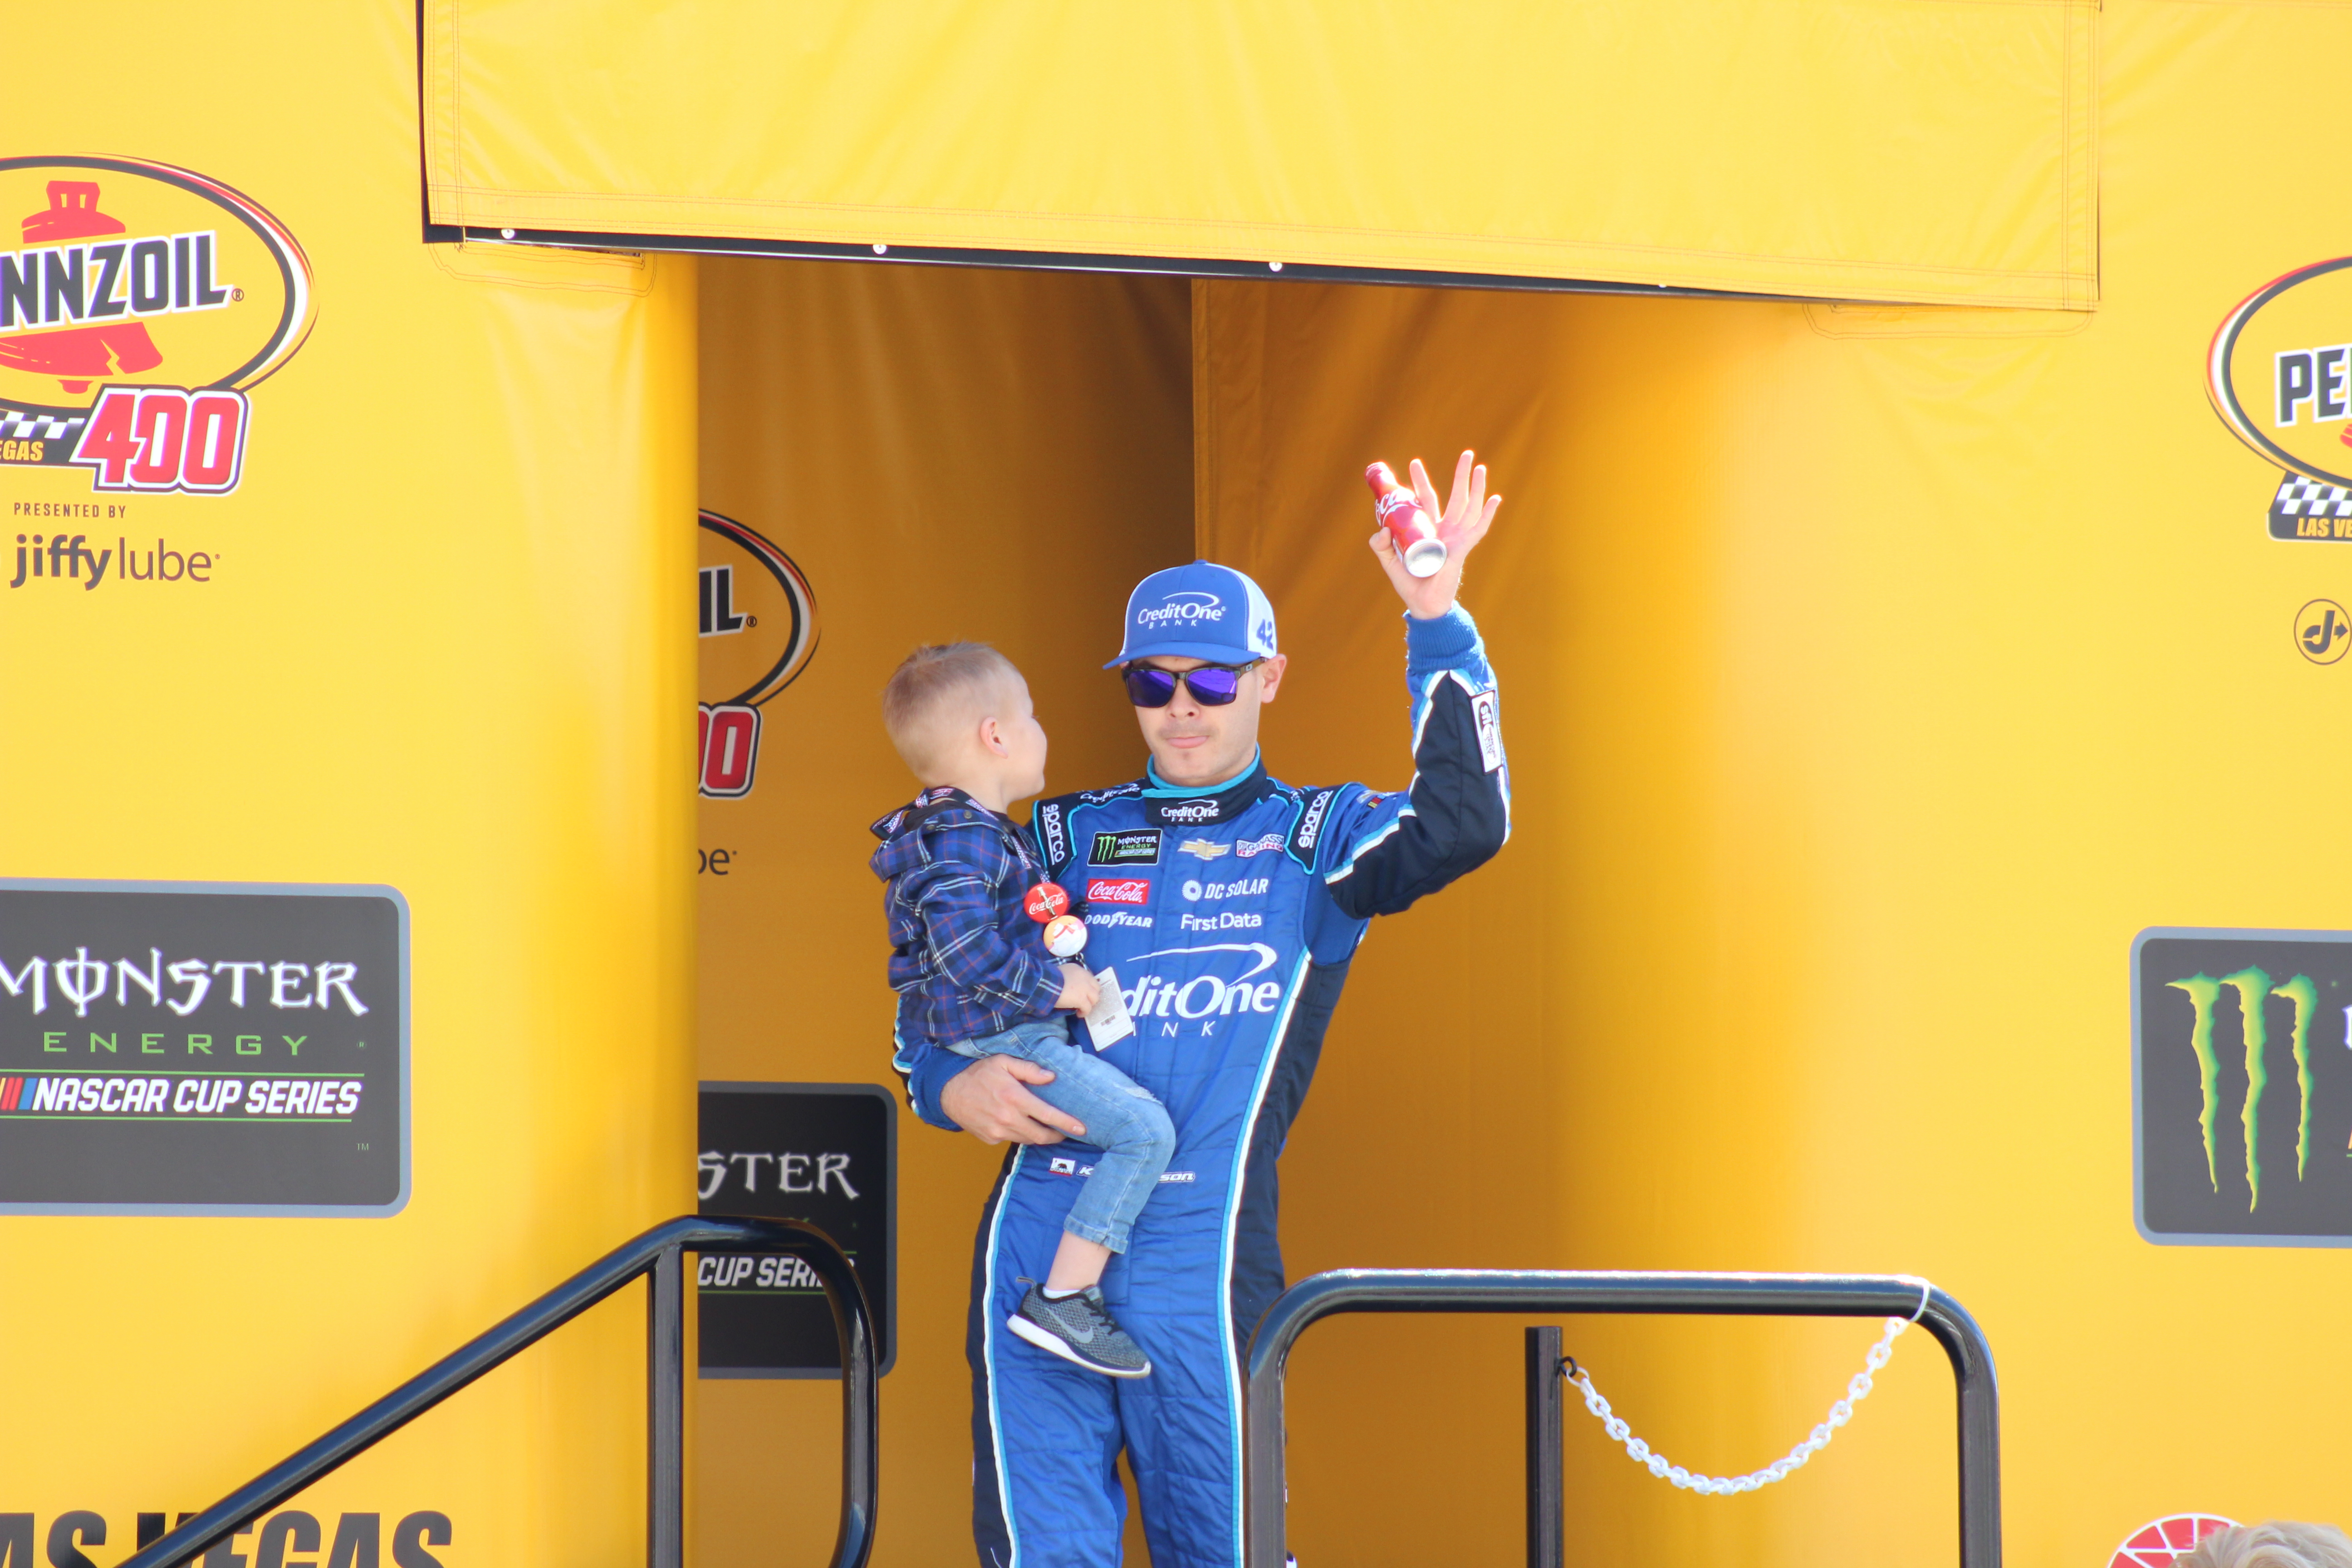 Make no mistake, Larson has embraced fatherhood and bonding with his son Owen at the track. (Photo Credit: Jose L. Acero Jr/TPF)